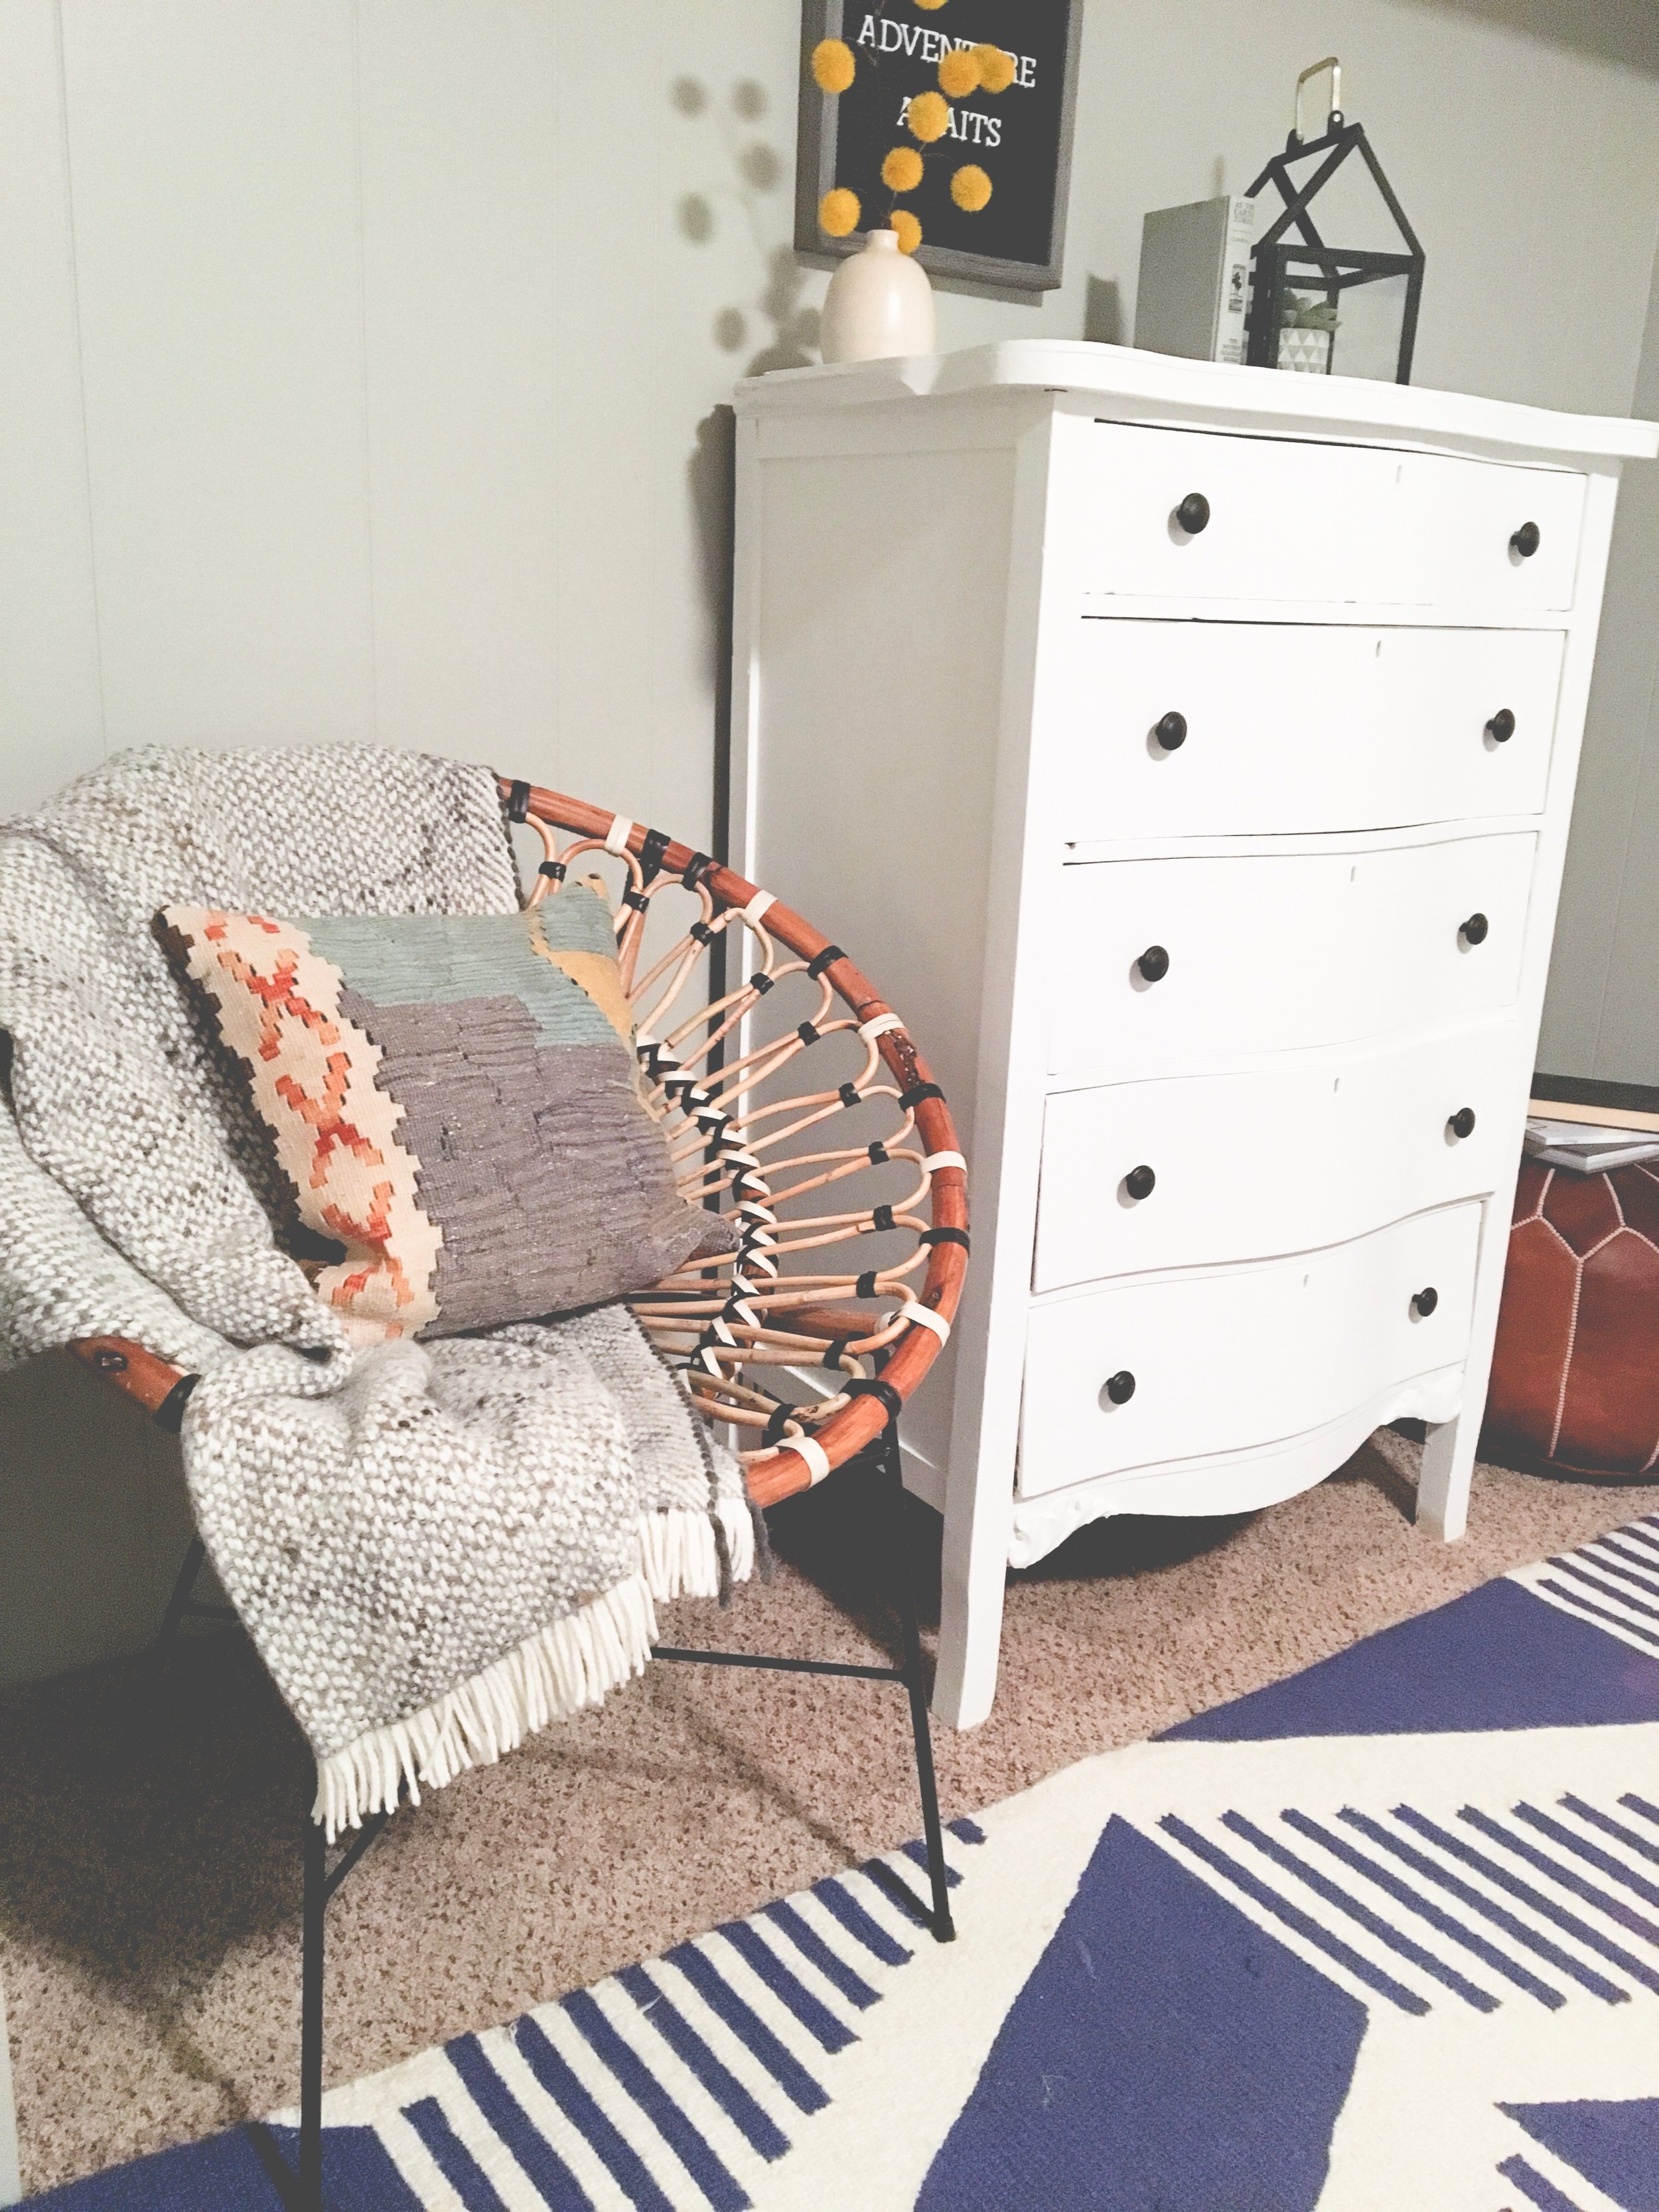 Our boring guest room gets a whole new modern cozy chic cabin look! Learn how to redecorate your guest room so it feels cozy and welcoming. Create a little reading nook with this cute rattan chair.